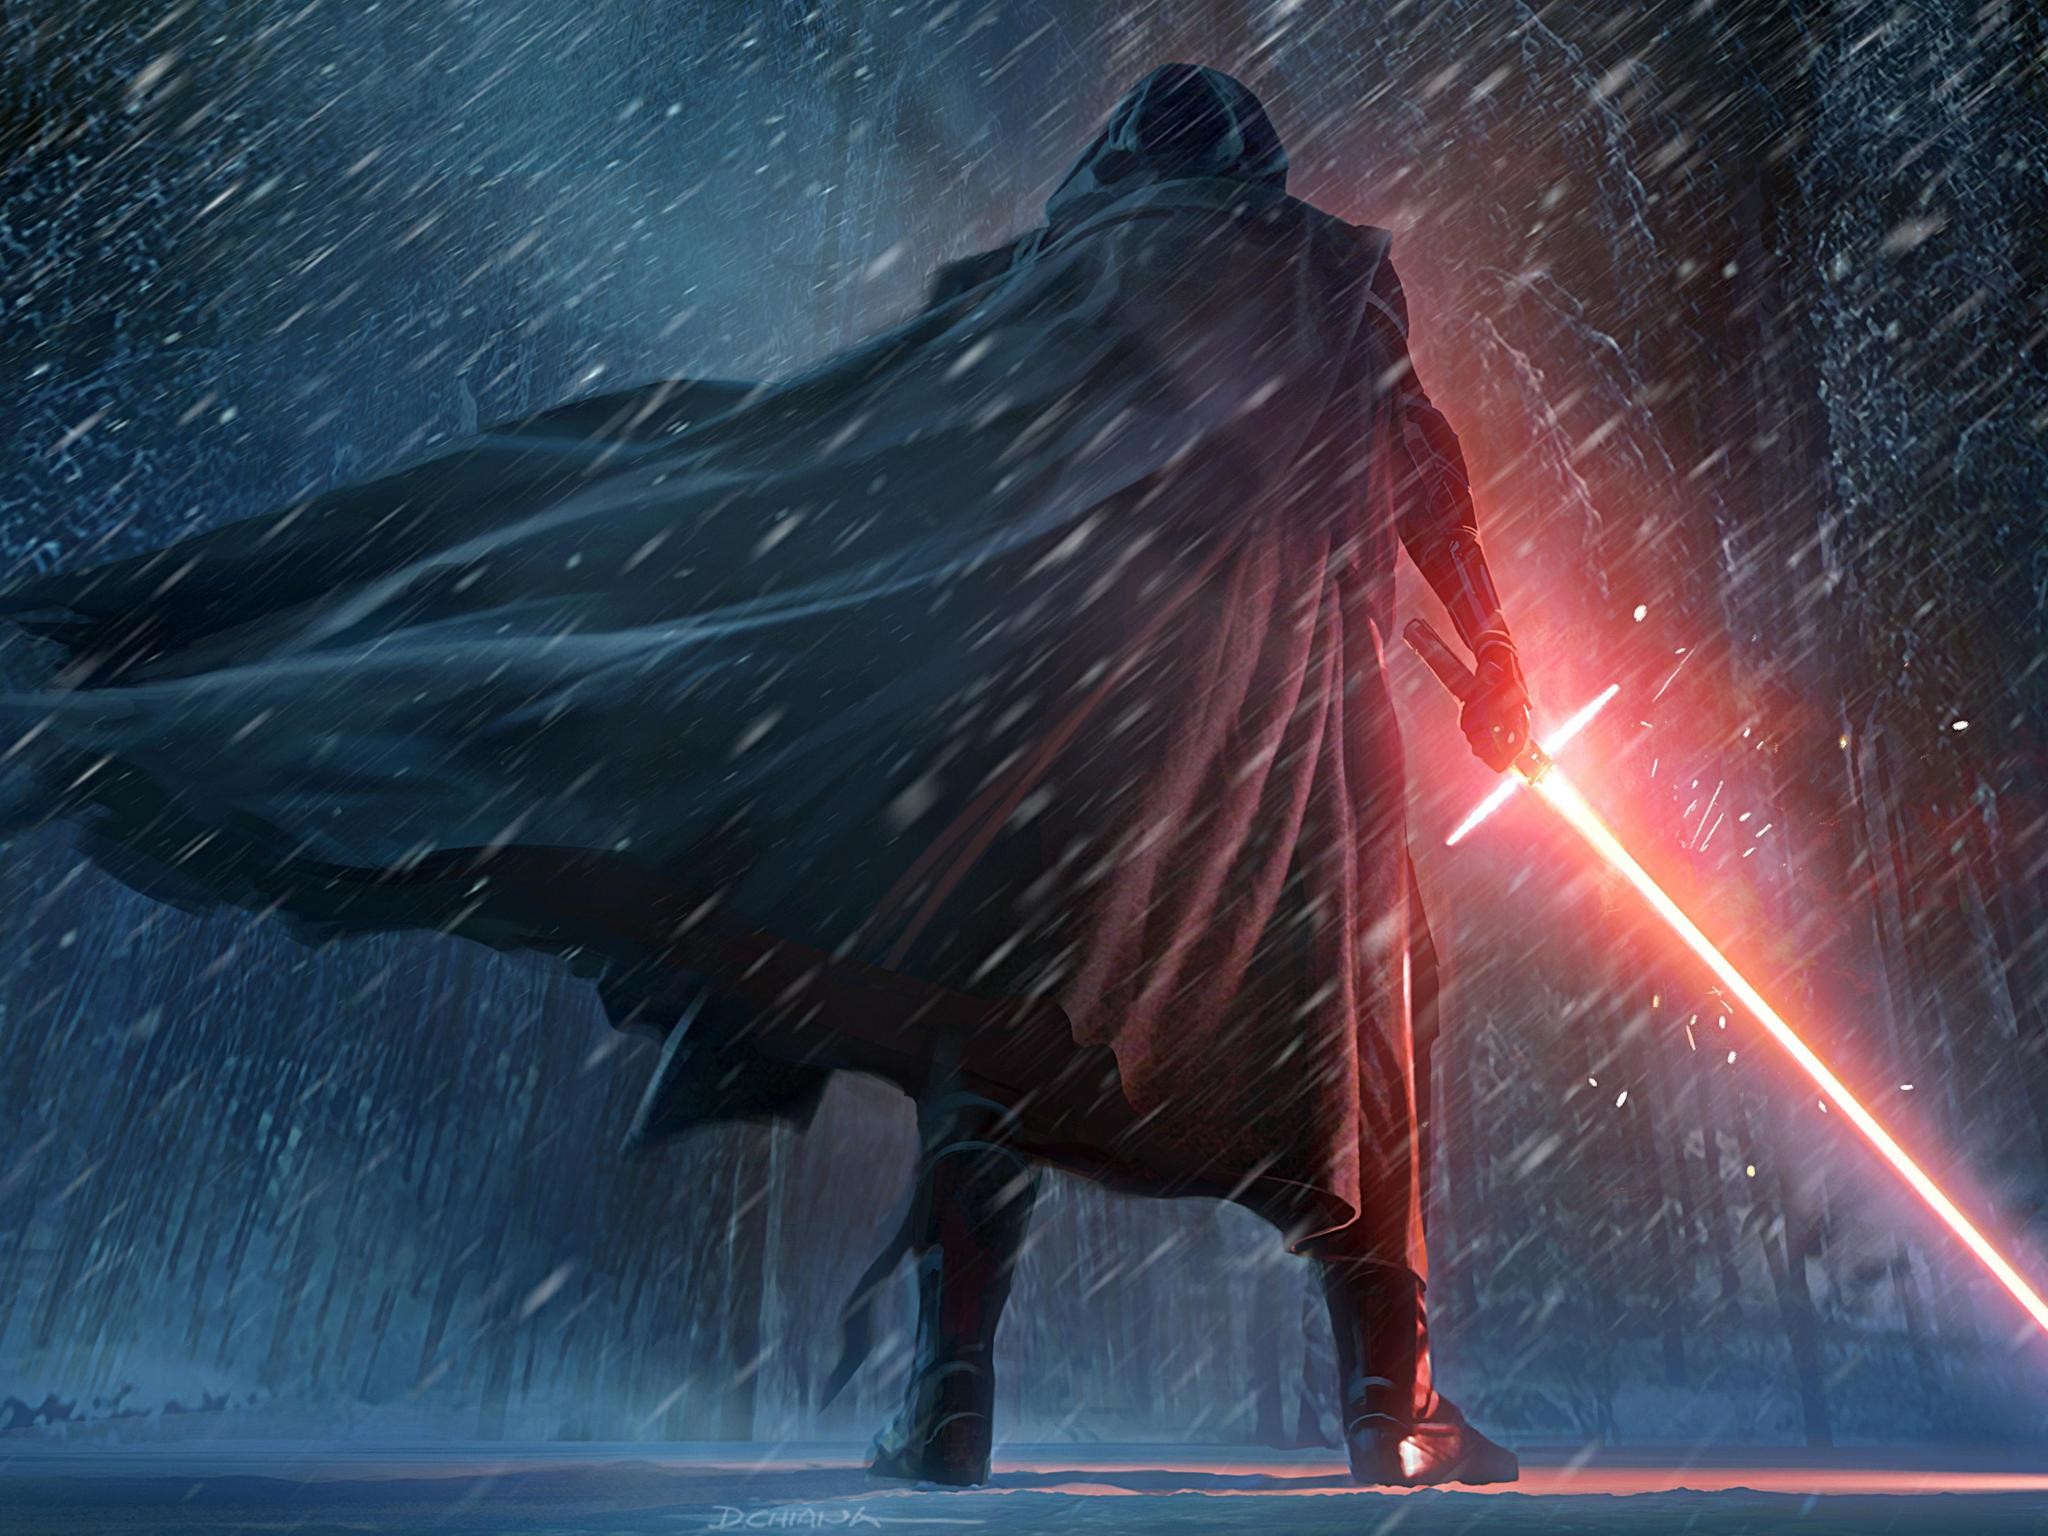 2048x1536 Star Wars The Force Awakens Background for Ipad Air.